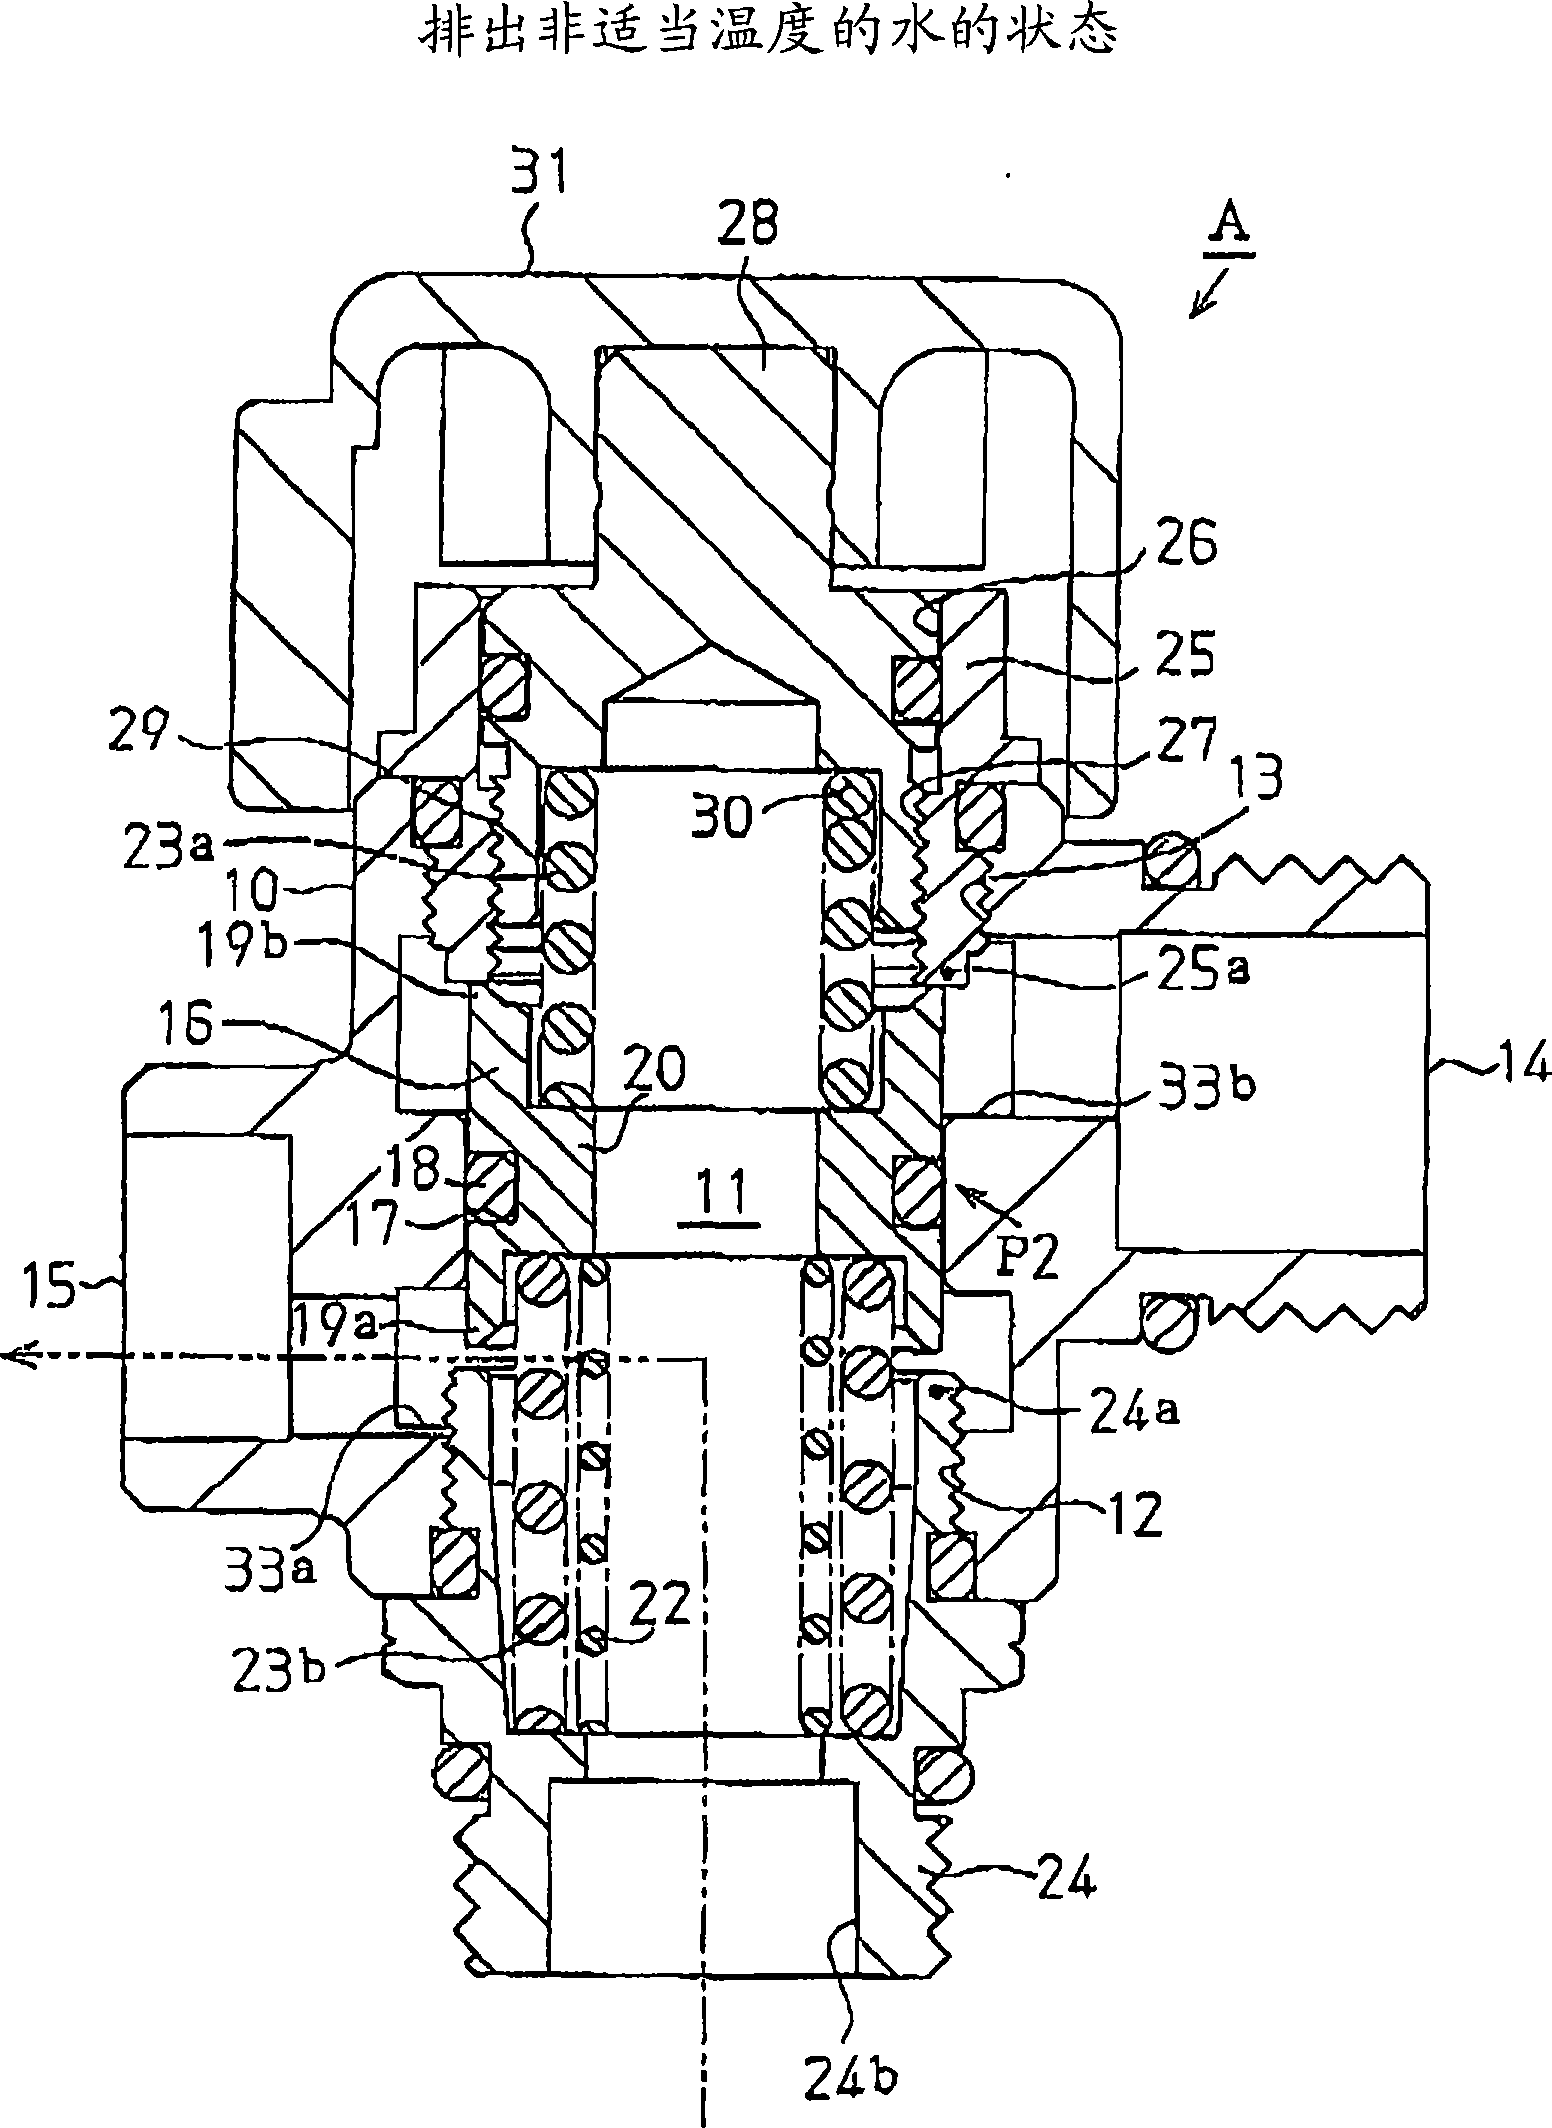 Flow channel switching valve and shower system